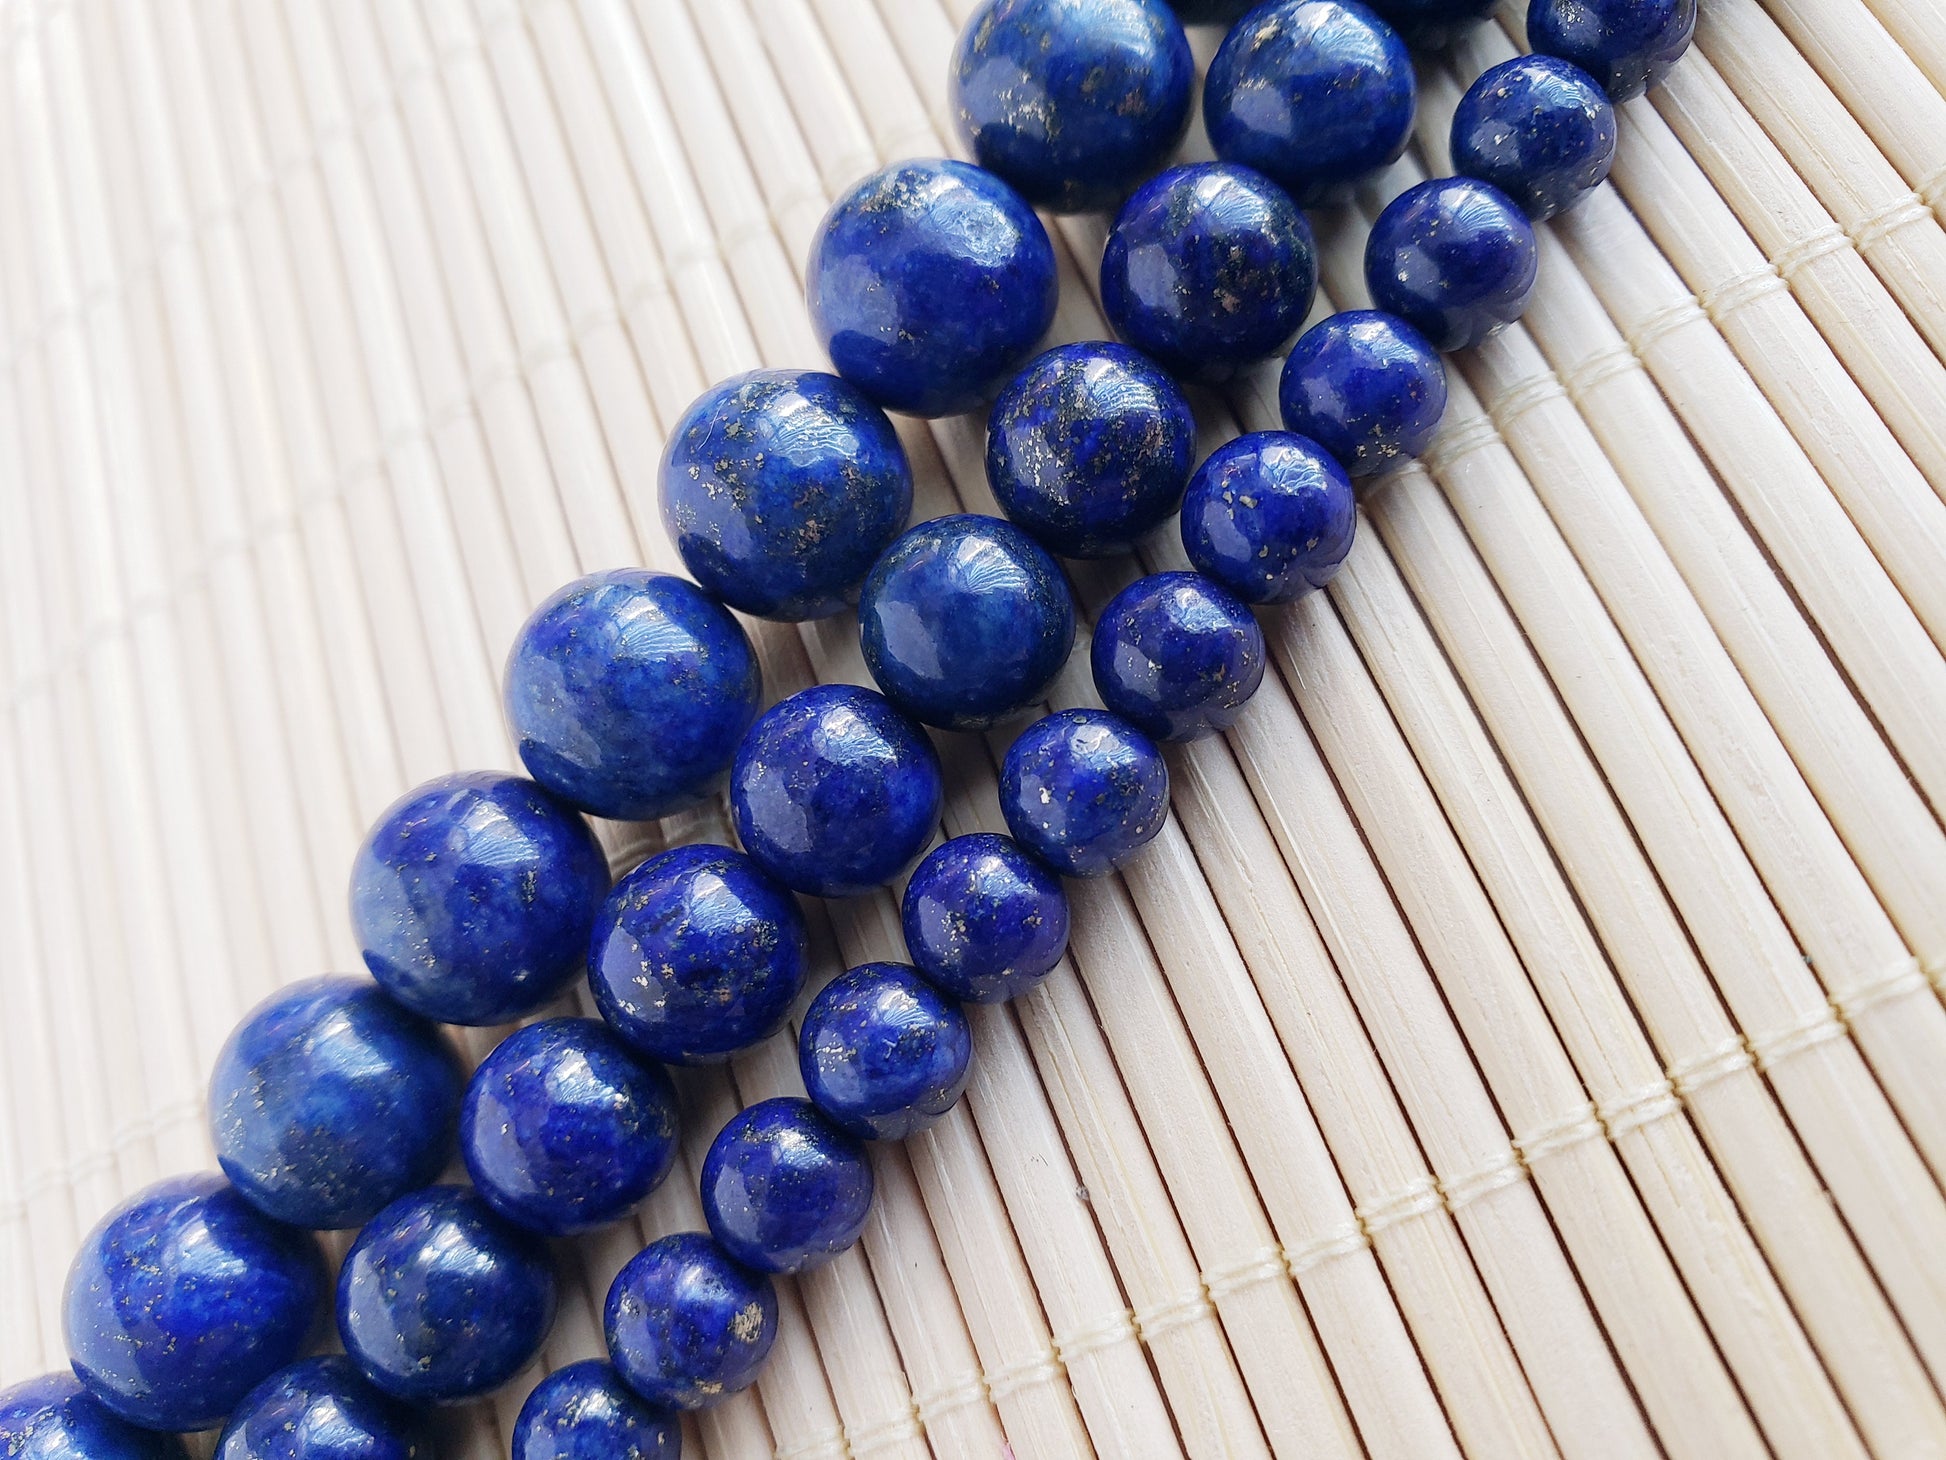 Crafting supplies such as lapis lazuli beads available at wholesale and retail prices, only at our crystal shop in San Diego!